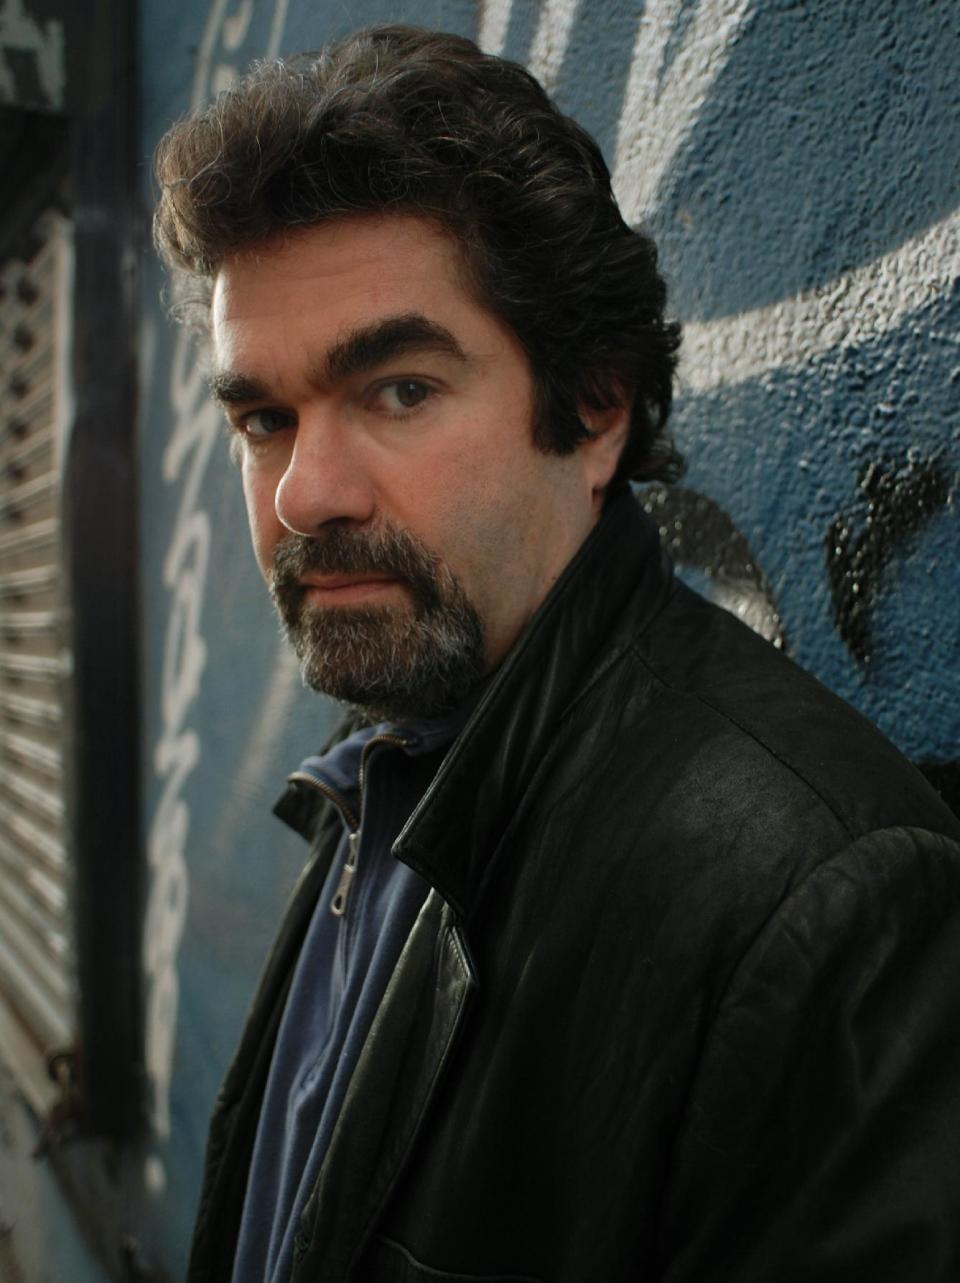 This photo provided by the Sundance Institute shows director, Joe Berlinger, of the documentary film, "Whitey: United States of America v. James J. Bulger," which has its premiere at the 2014 Sundance Film Festival. Though James “Whitey” Bulger declined to take the stand at the summer 2013 trial where he was convicted of multiple counts of murder and extortion, the 83-year-old former crime boss can be heard defending himself in a new documentary. (AP Photo/Sundance Institute, Ali Pflaum)